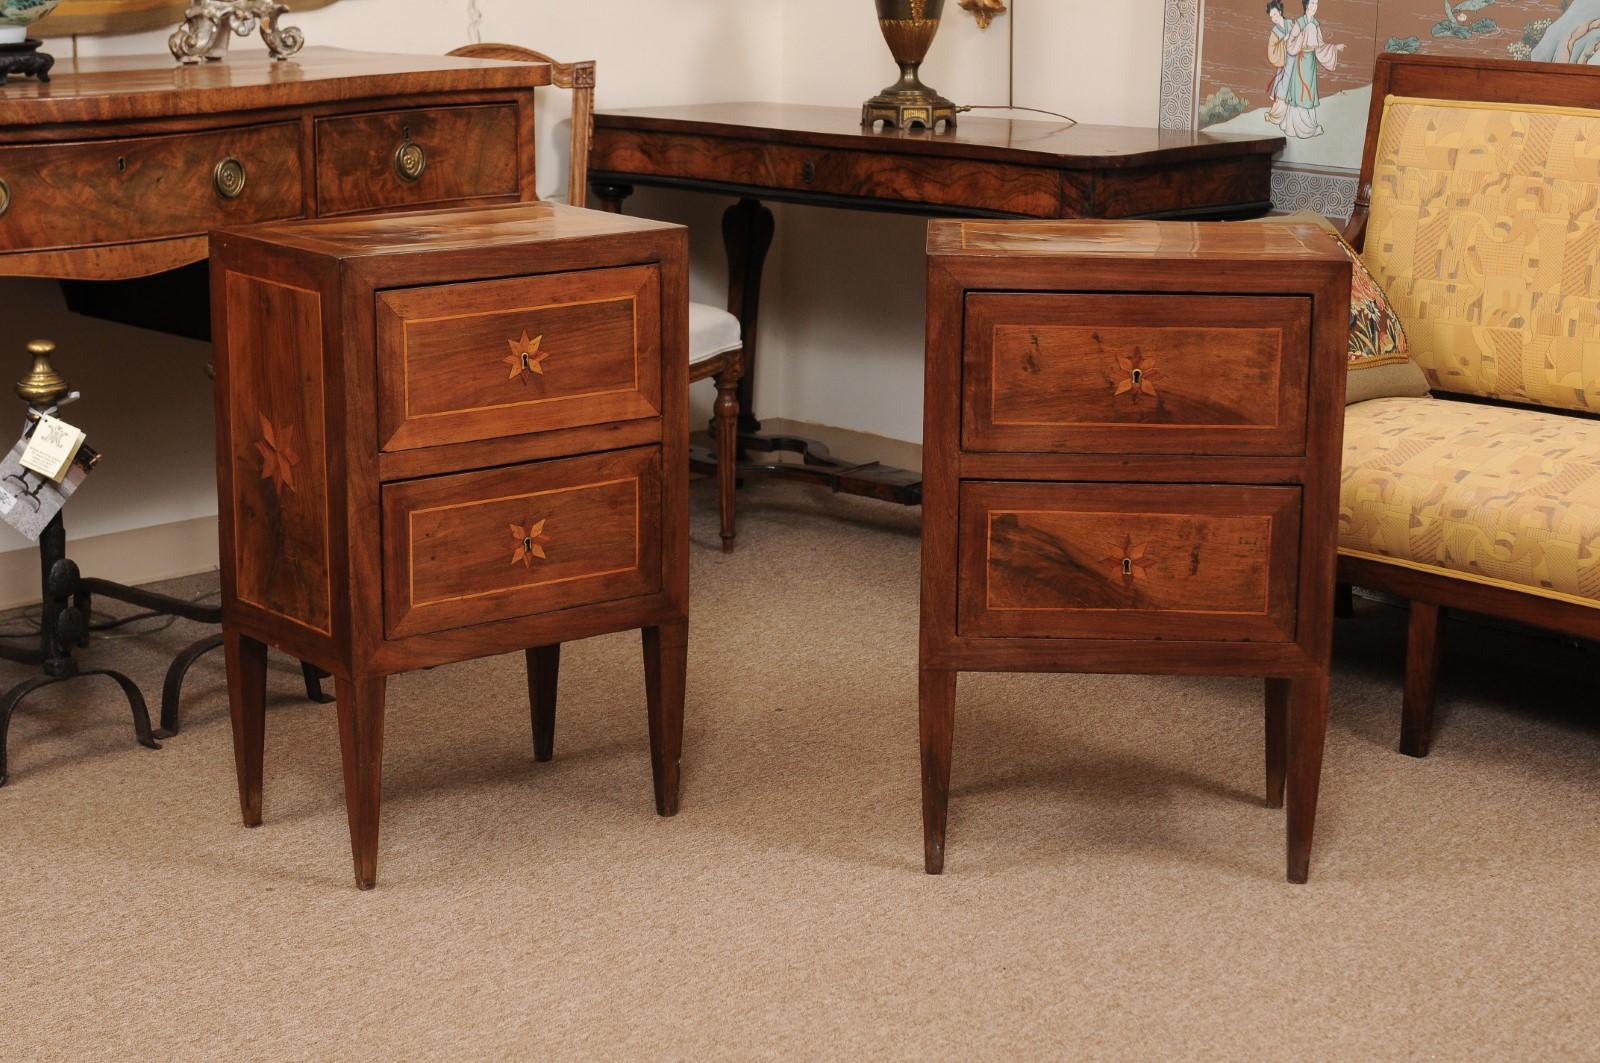 A pair of late 19th century neoclassical style inlaid walnut commodini featuring 2 drawers and tapered legs.